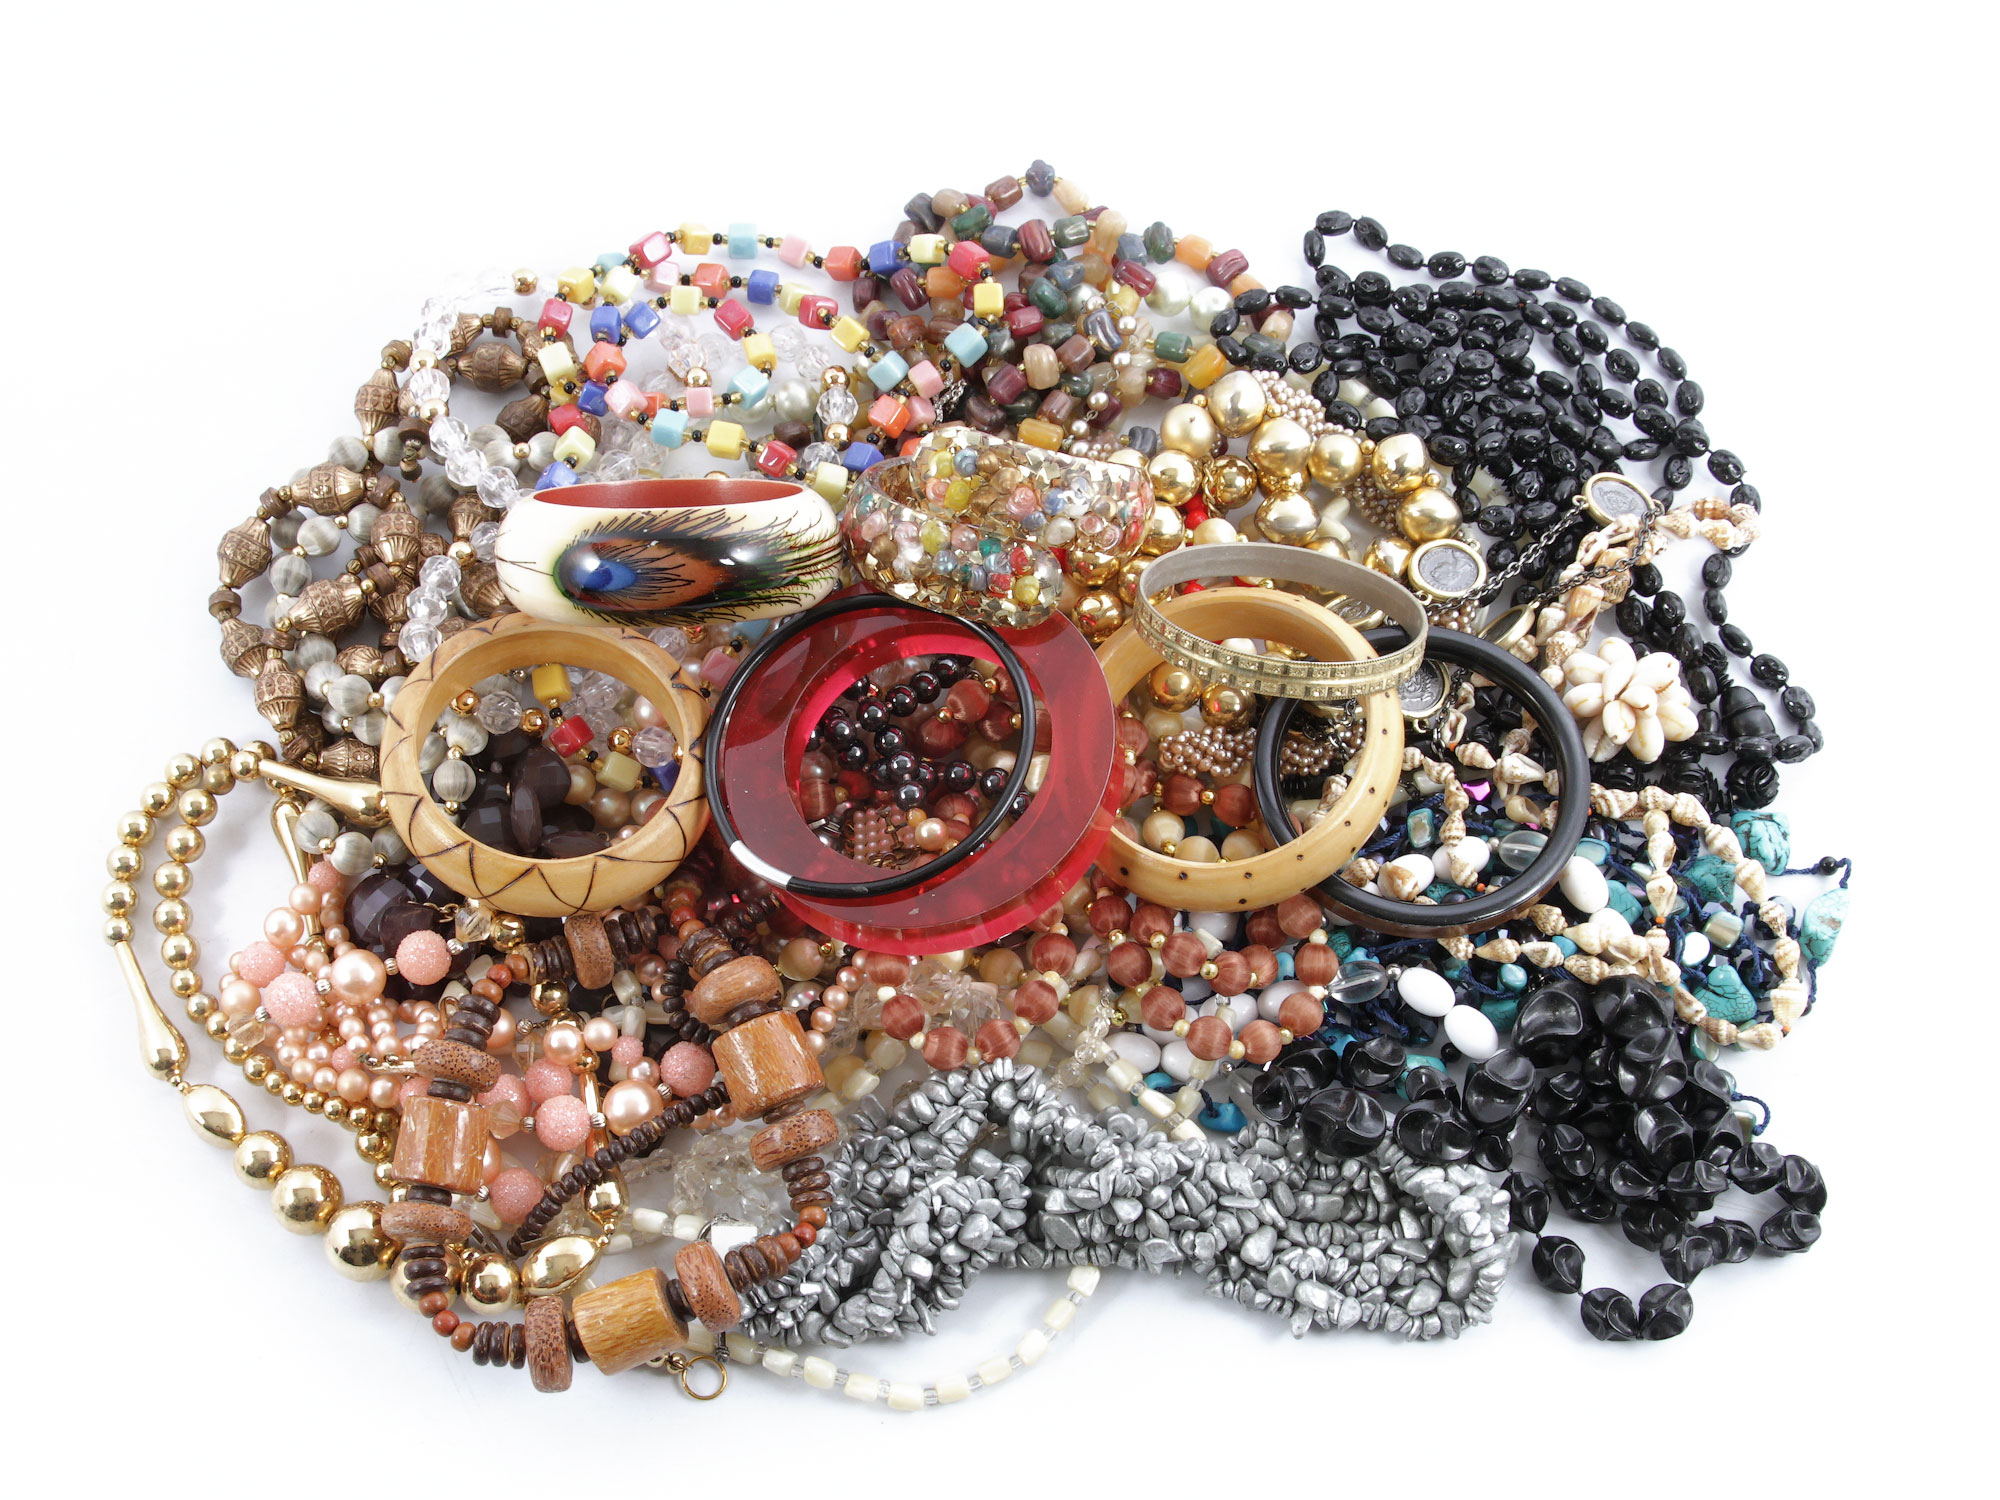 A LARGE LOT OF VINTAGE CUSTOM JEWELRY ITEMS PIC-0